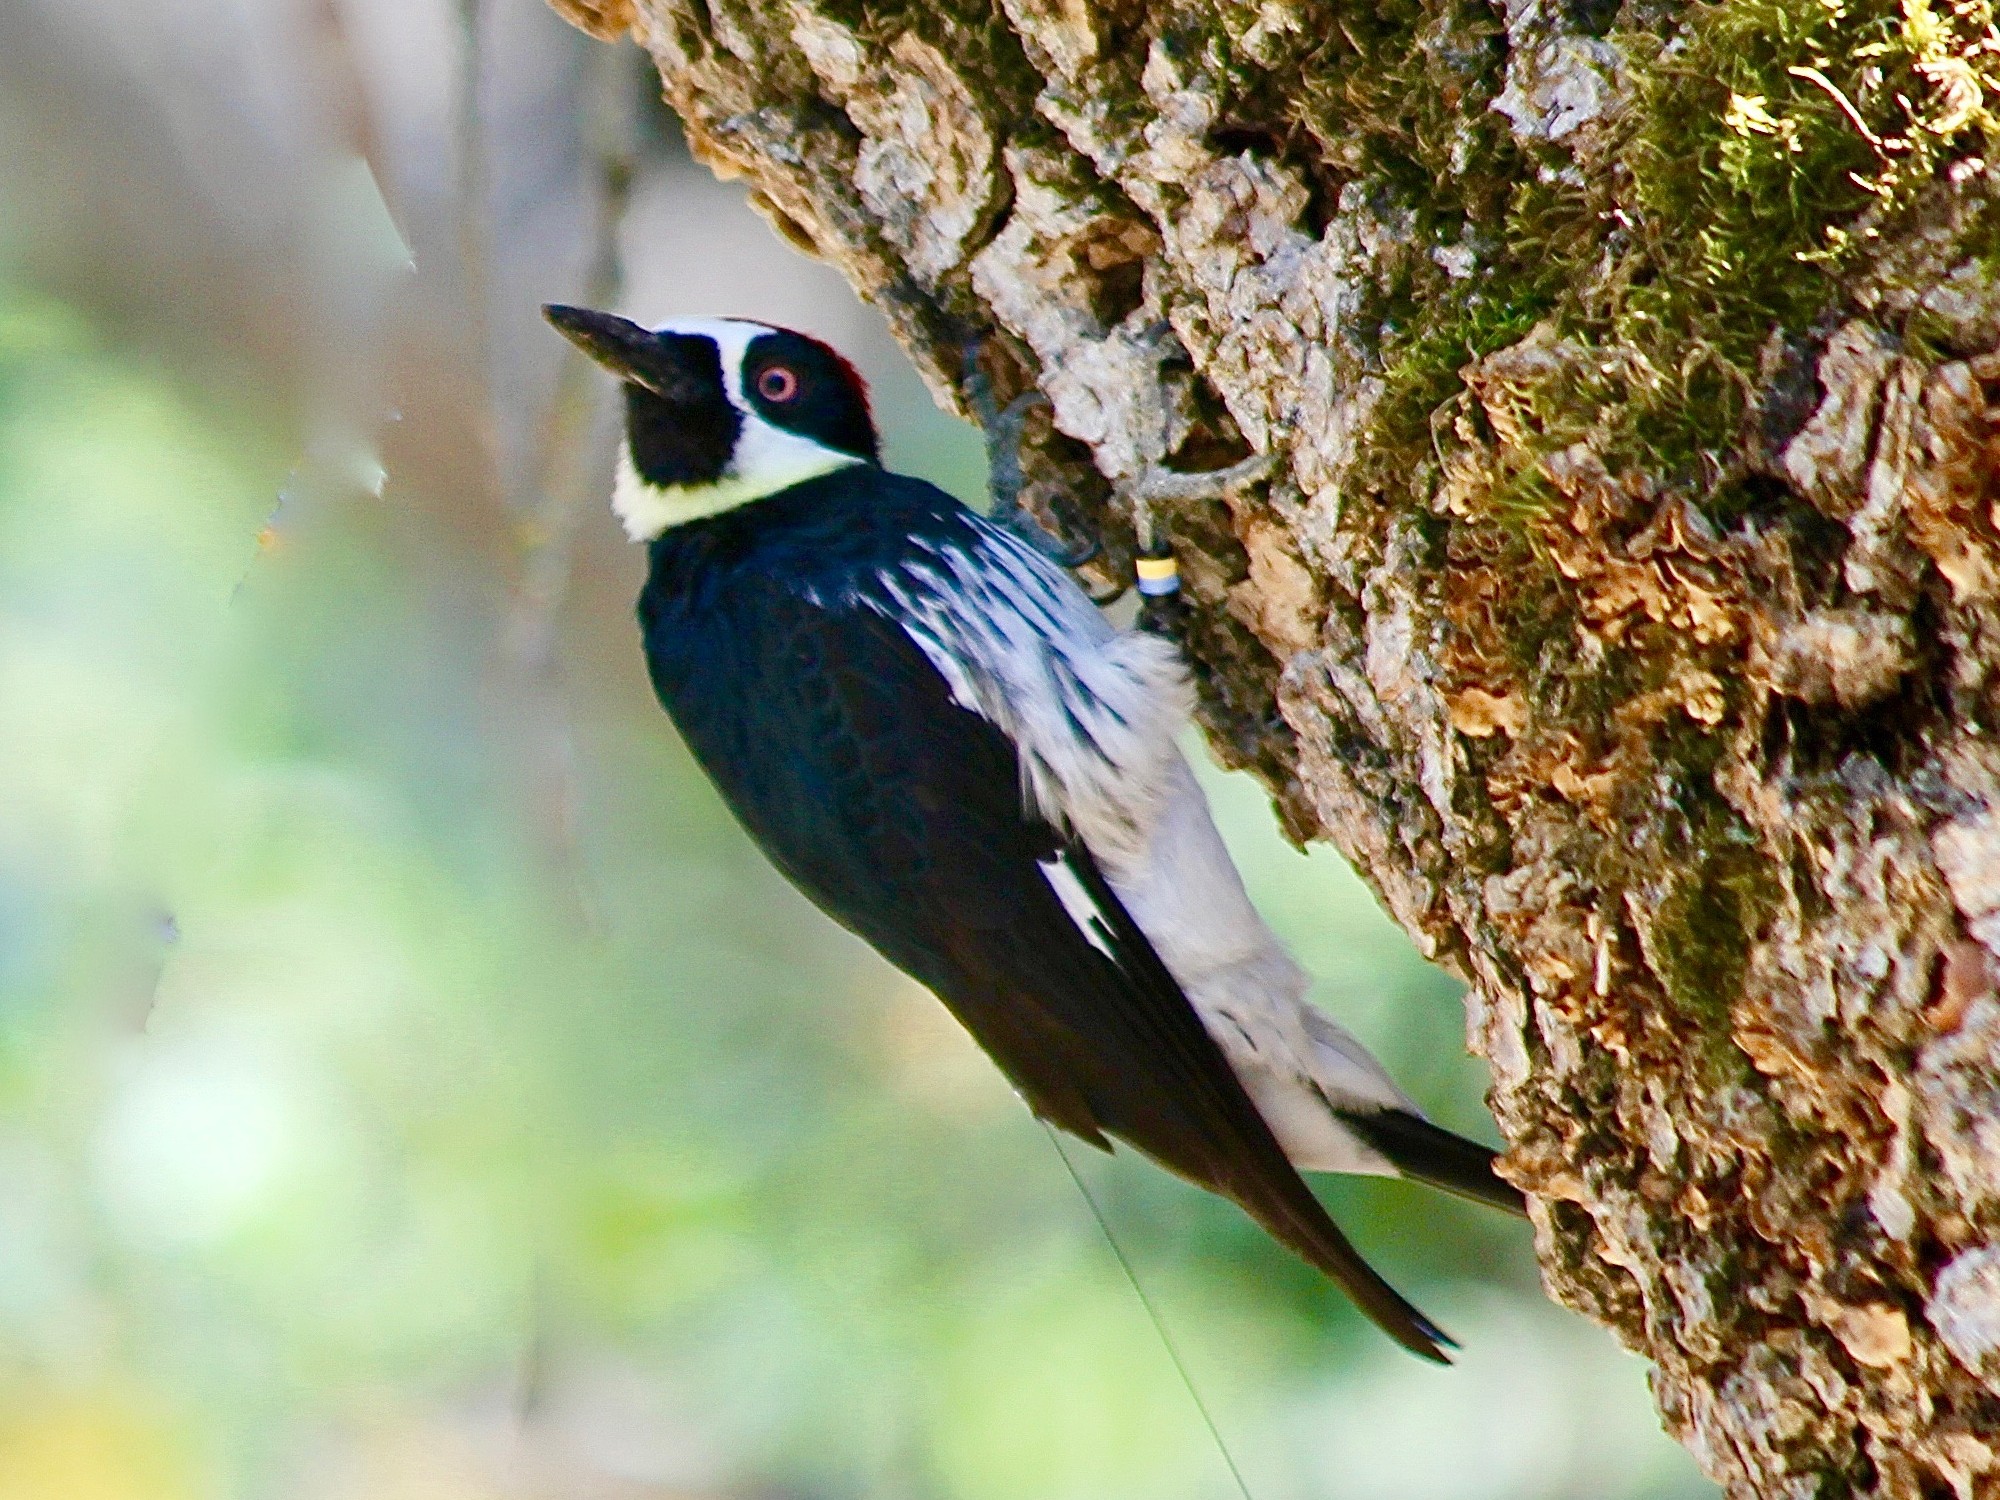 Blood, death, and eye gouging: welcome to the world of acorn woodpeckers